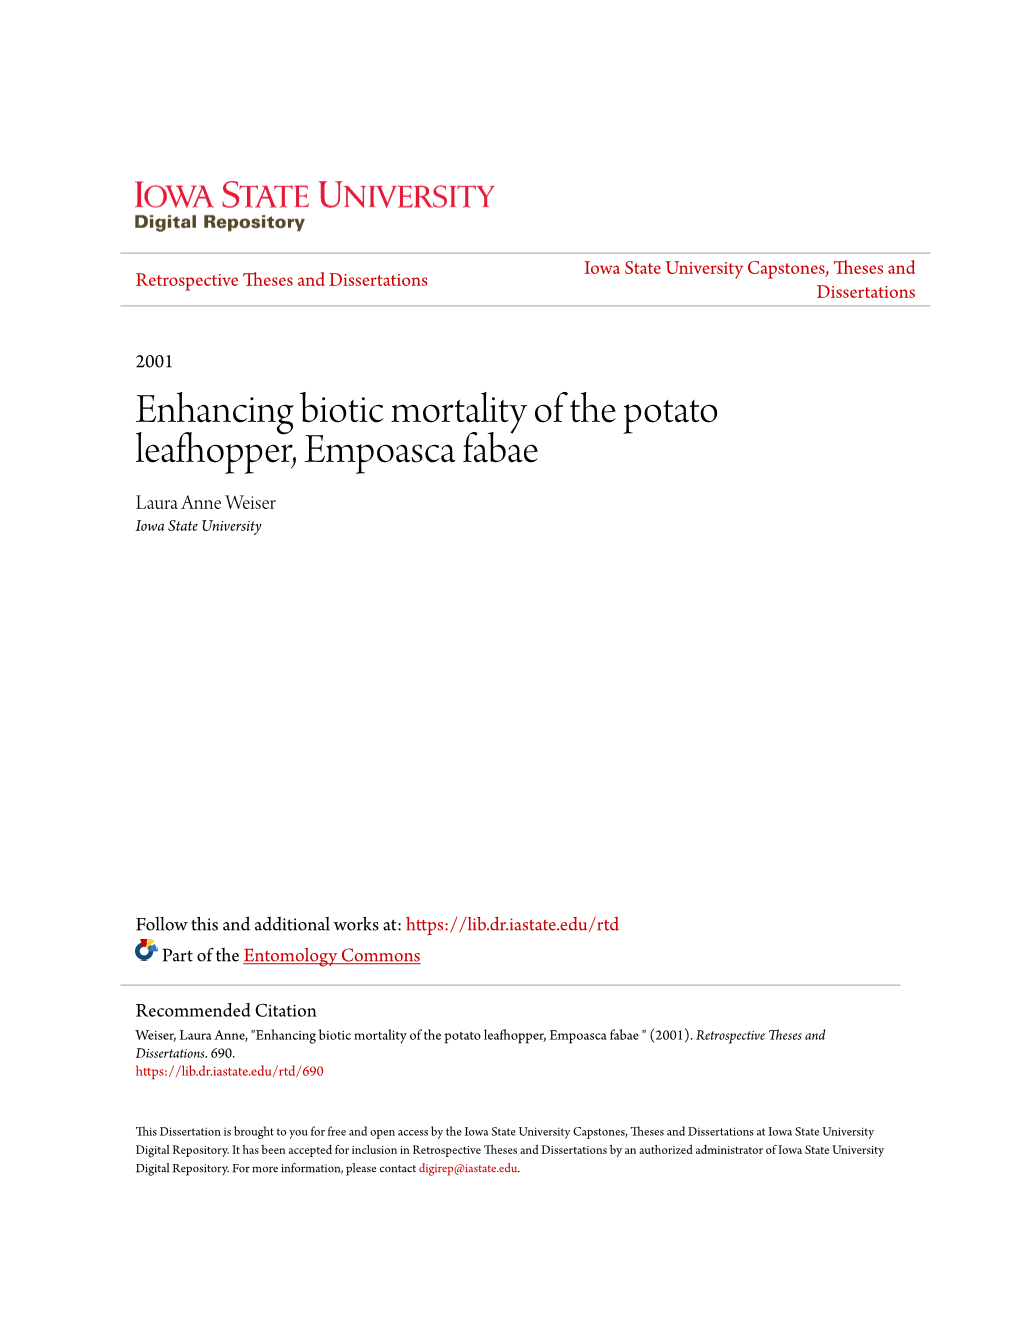 Enhancing Biotic Mortality of the Potato Leafhopper, Empoasca Fabae Laura Anne Weiser Iowa State University